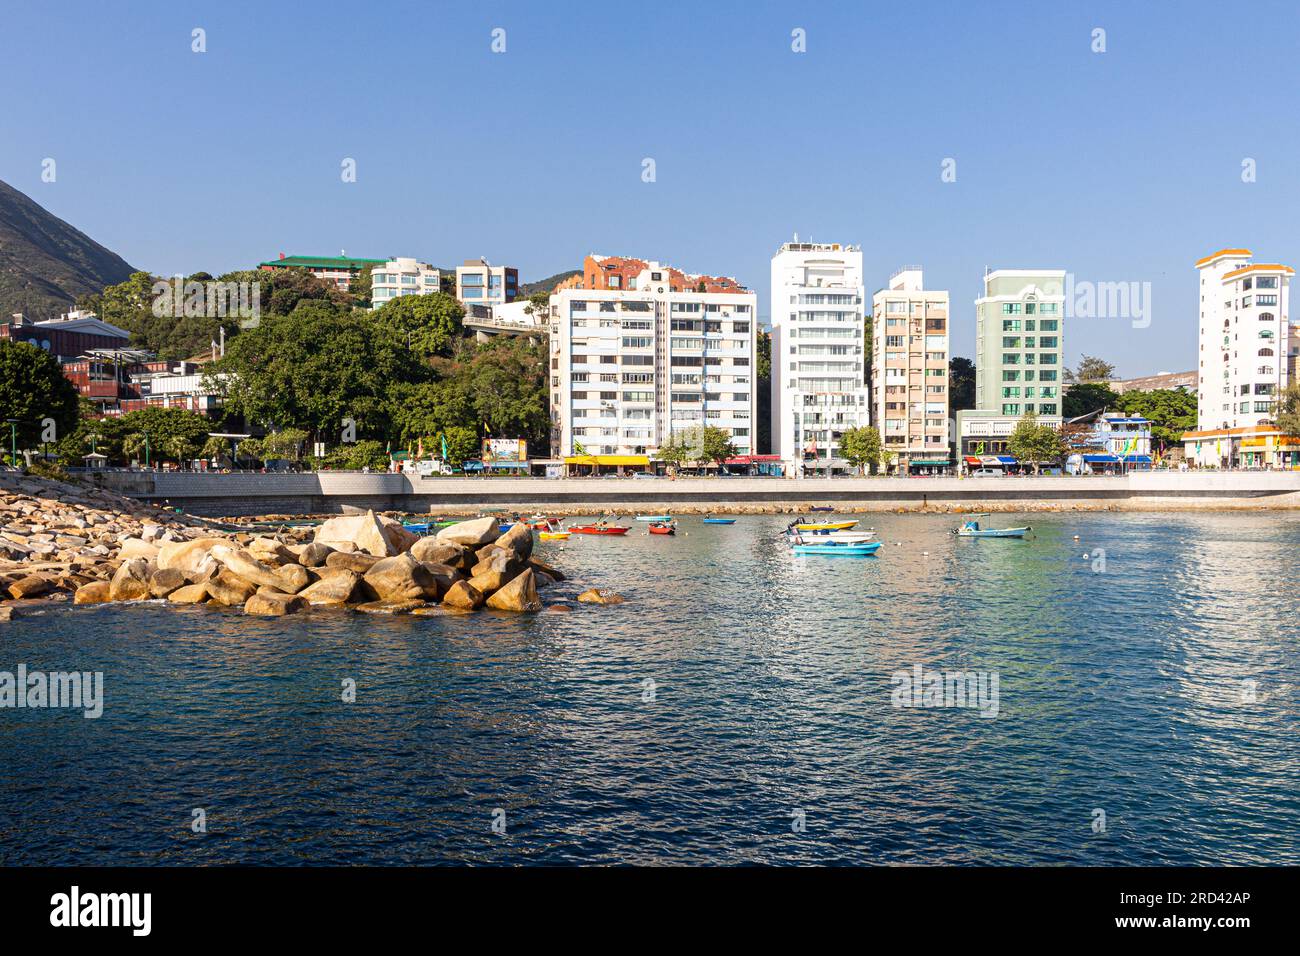 The rocky shoreline, promenade and high rise buildings of Stanley Town in Hong Kong,China - image taken from the Wooden Pagoda Stock Photo